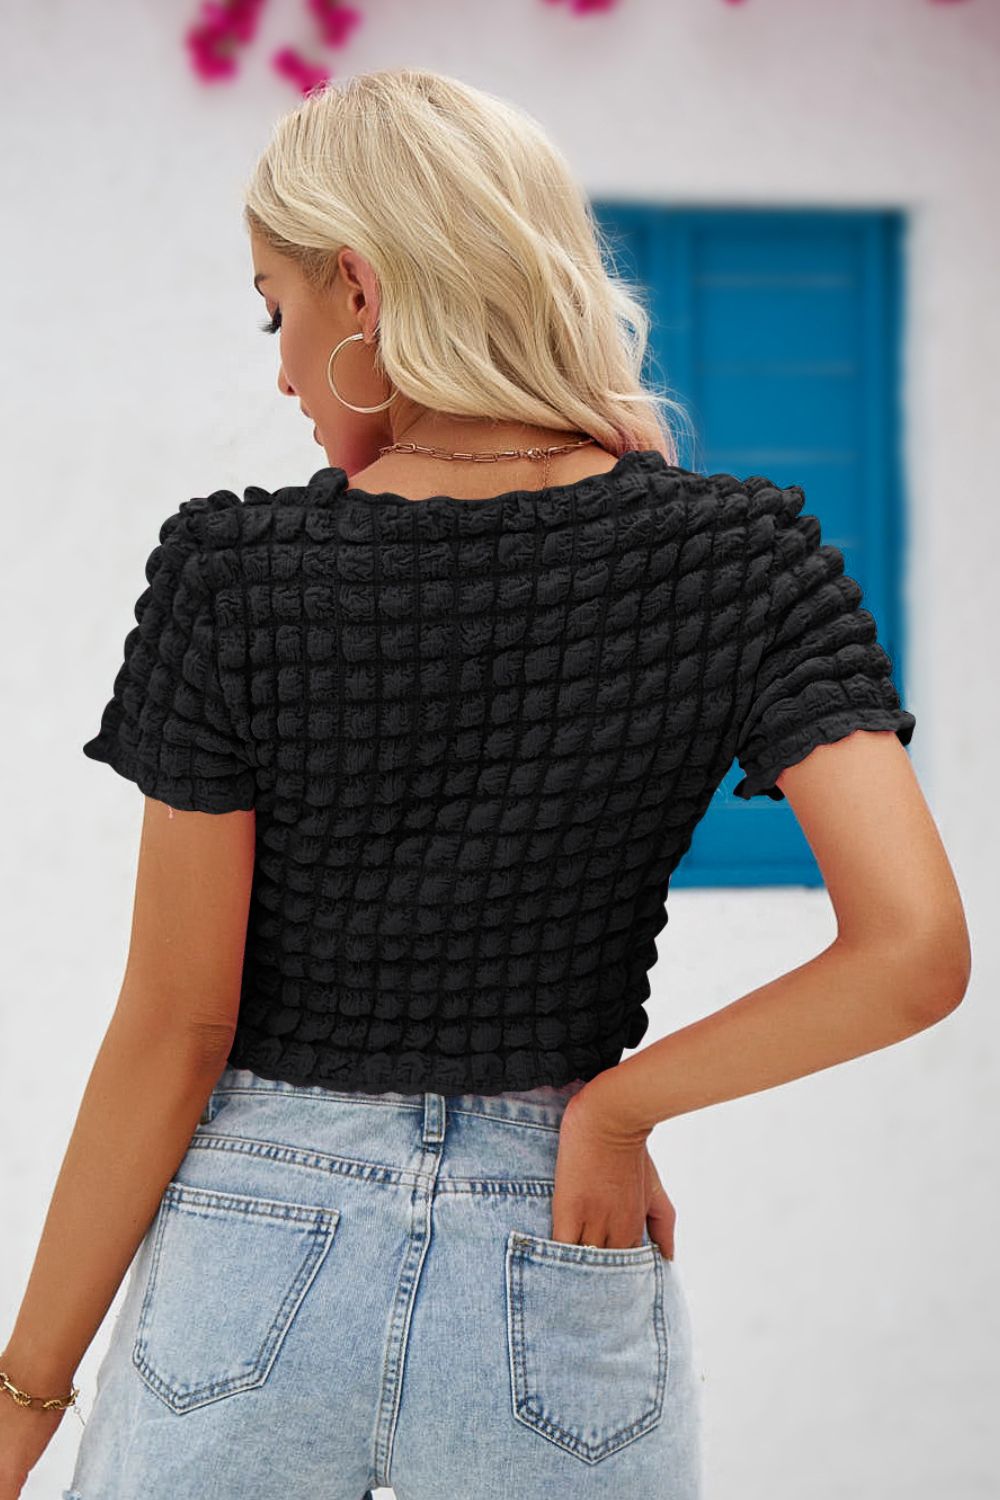 Round Neck Short Sleeve Crop Top - Women’s Clothing & Accessories - Shirts & Tops - 23 - 2024